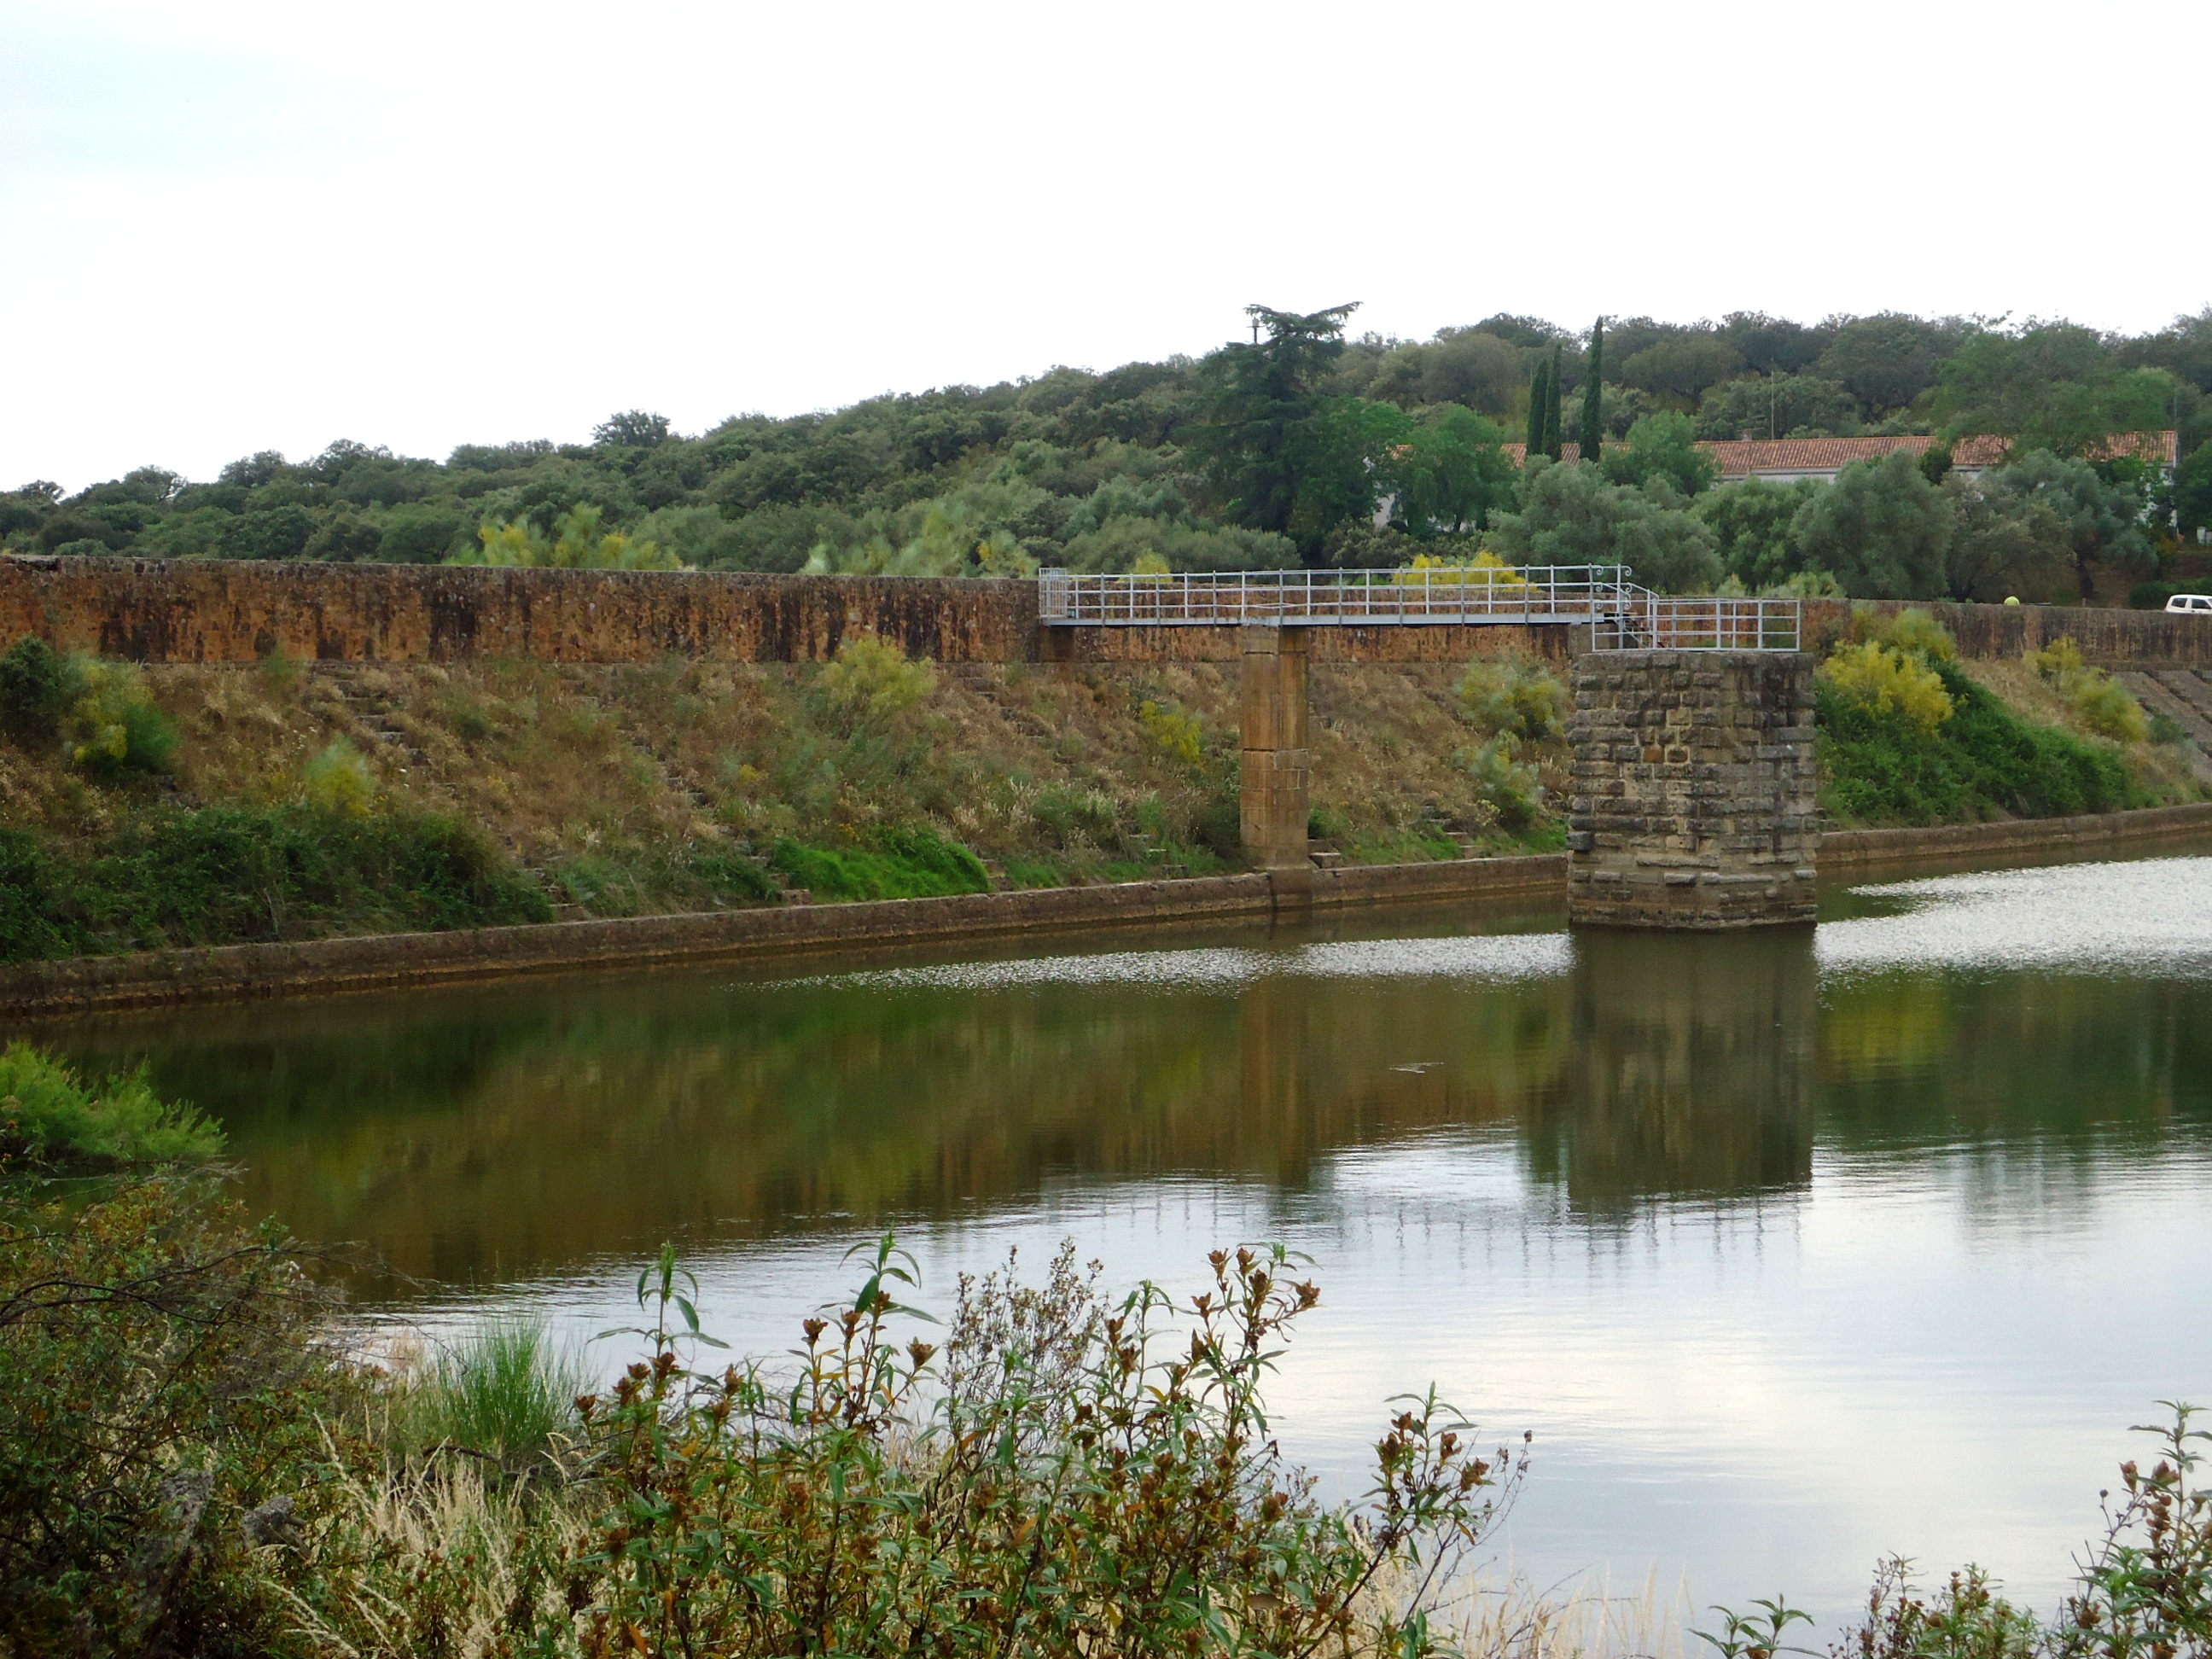 An earthen dam with grass and plants rises above water.